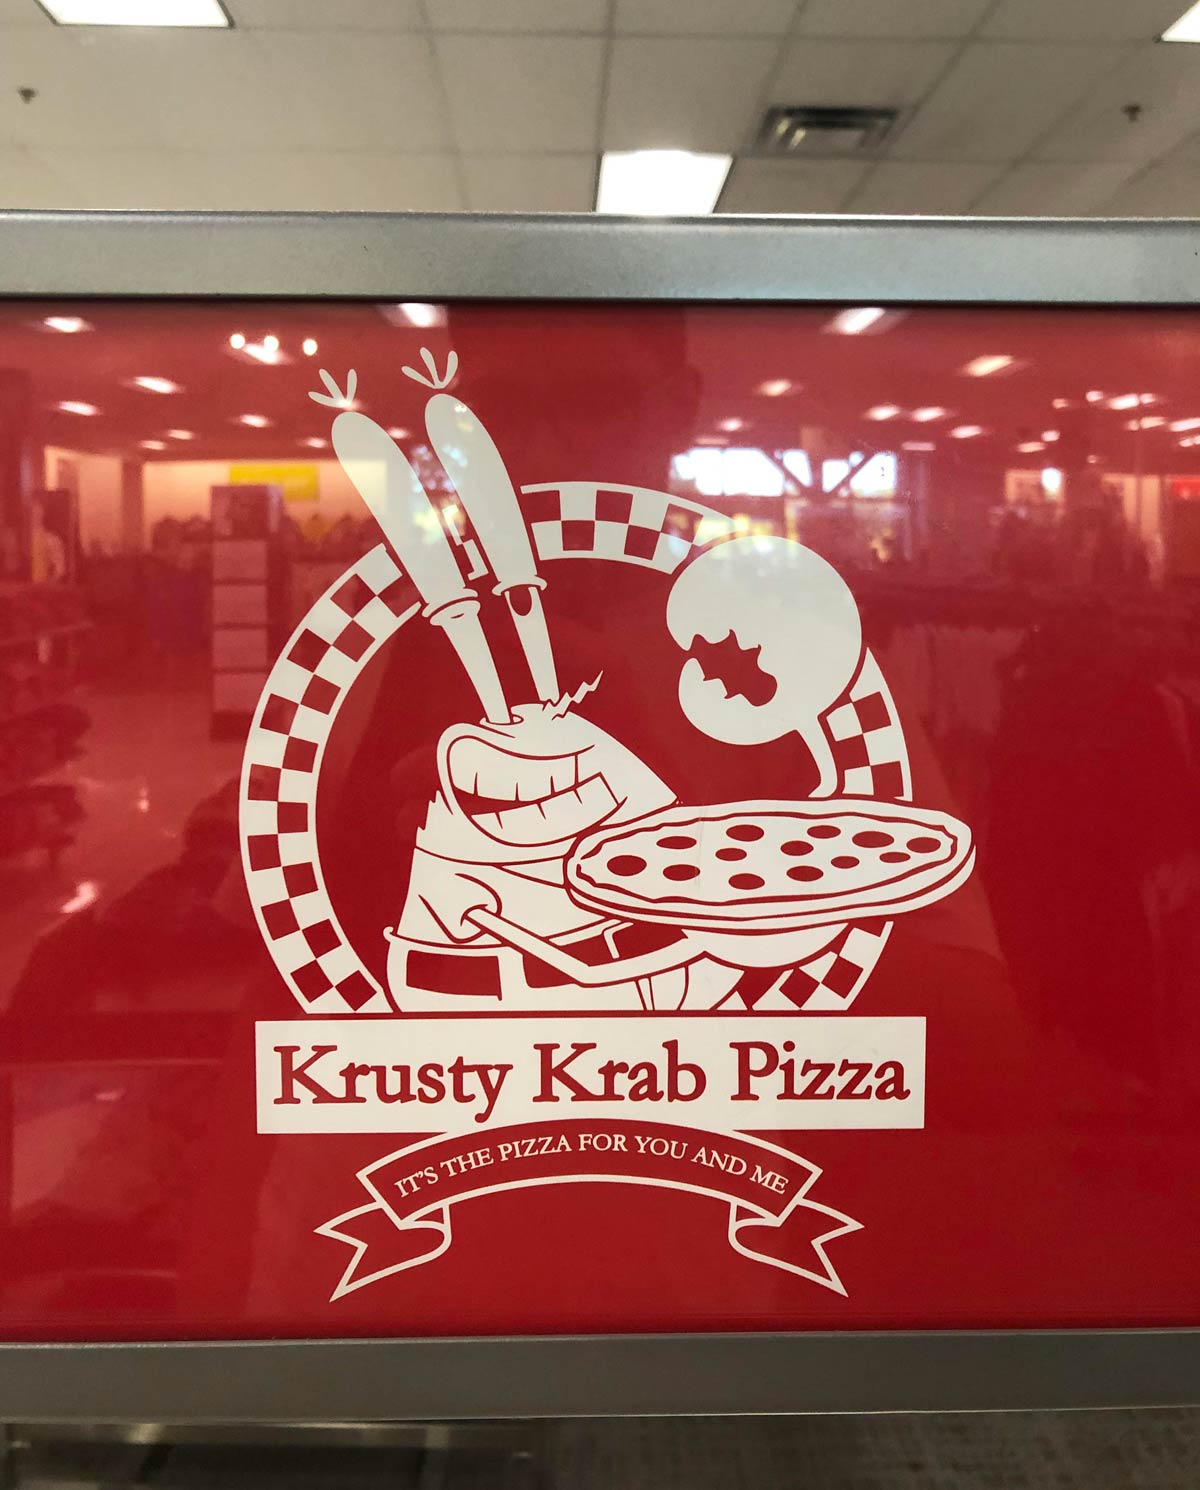 This is not the Krusty Krab I know